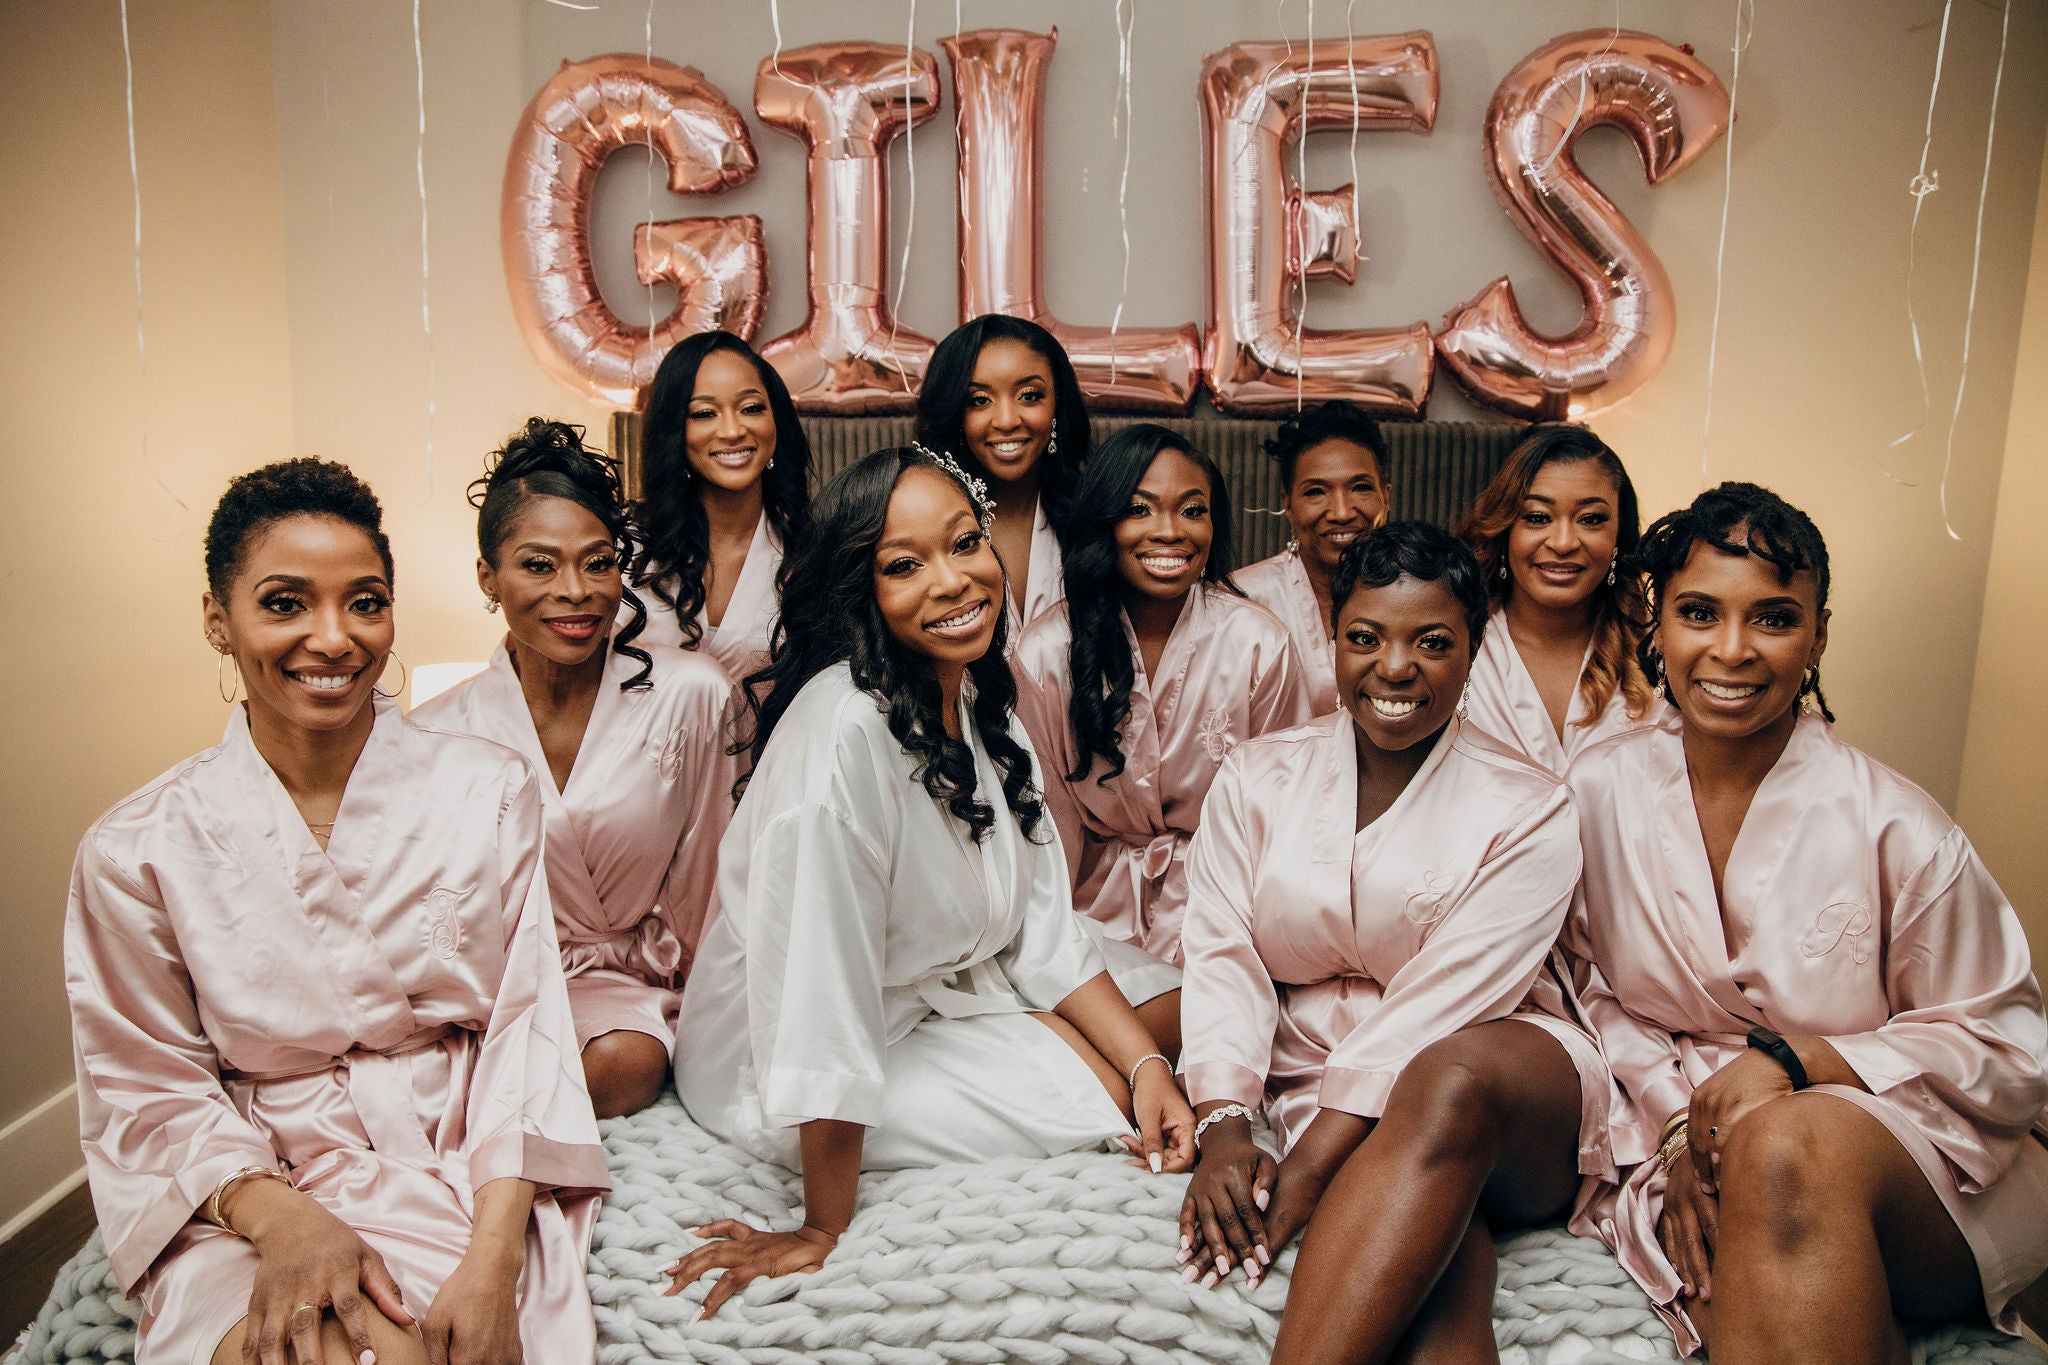 Bridal Bliss: Their First Wedding Got Canceled, So Alisha and Jordan Went All Out This Time